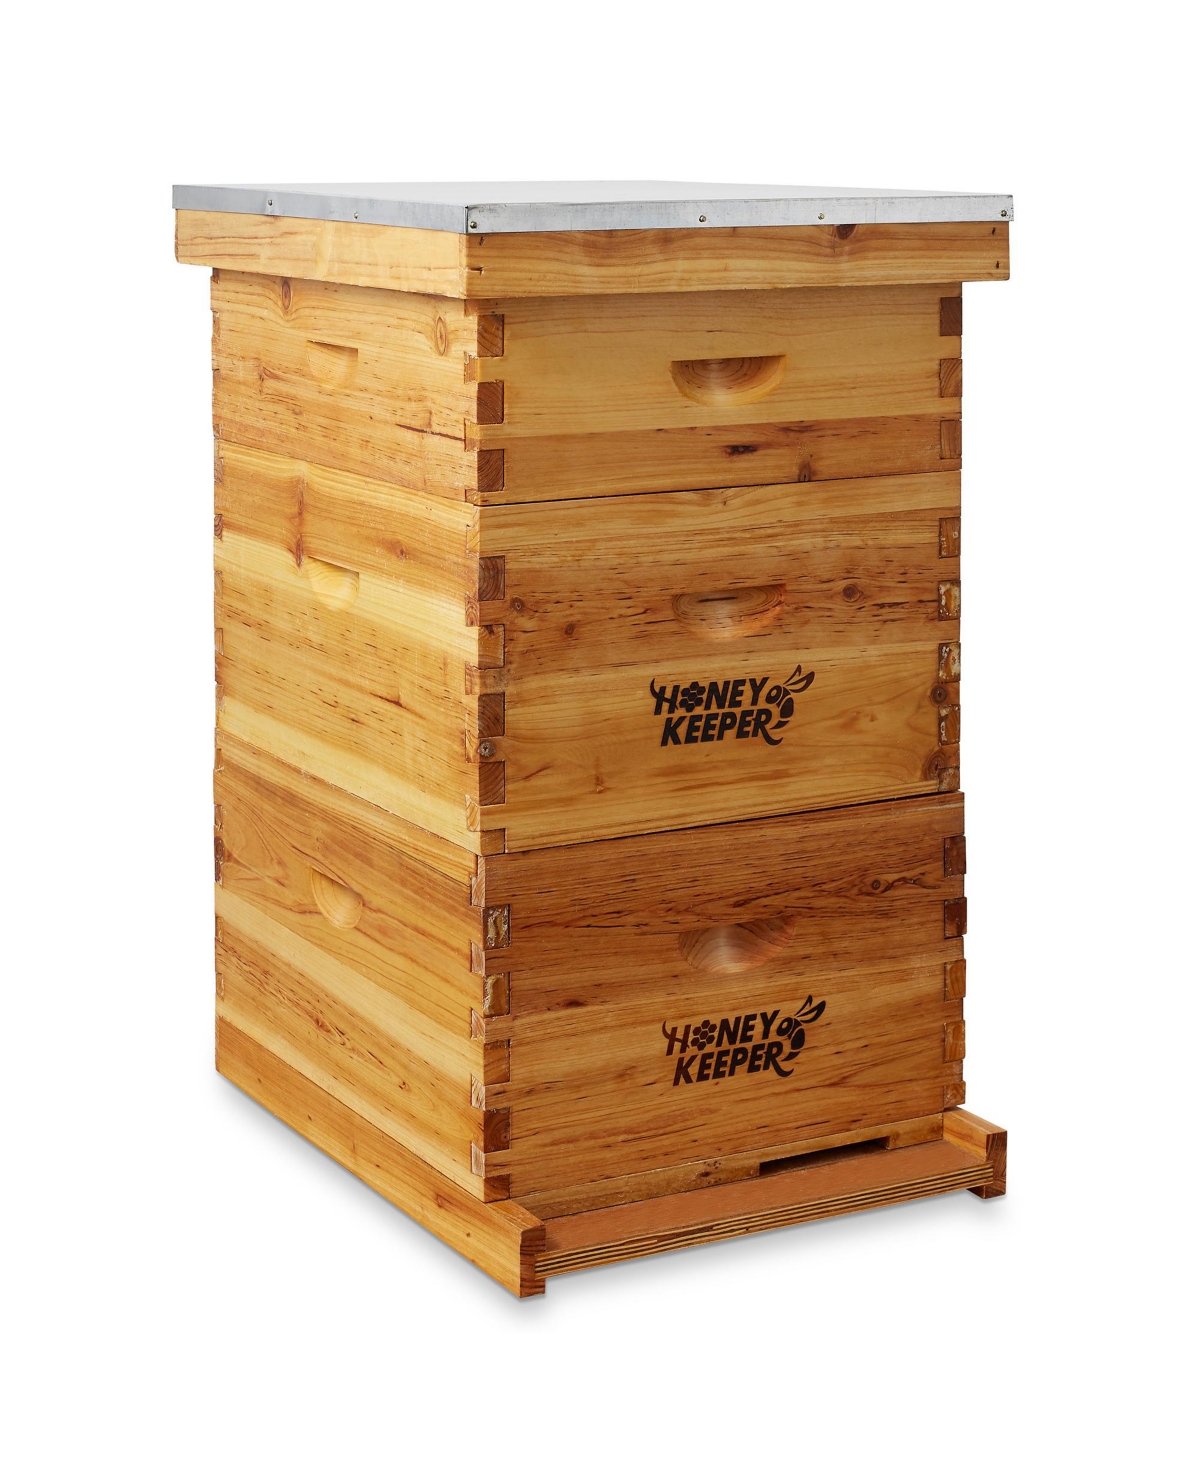 Beehive 10 Frame Complete Box Kit Coated in 100% Beeswax (Waxed Boxes, 2 Deep and 1 Medium) with Wooden Frames and Waxed Foundations for